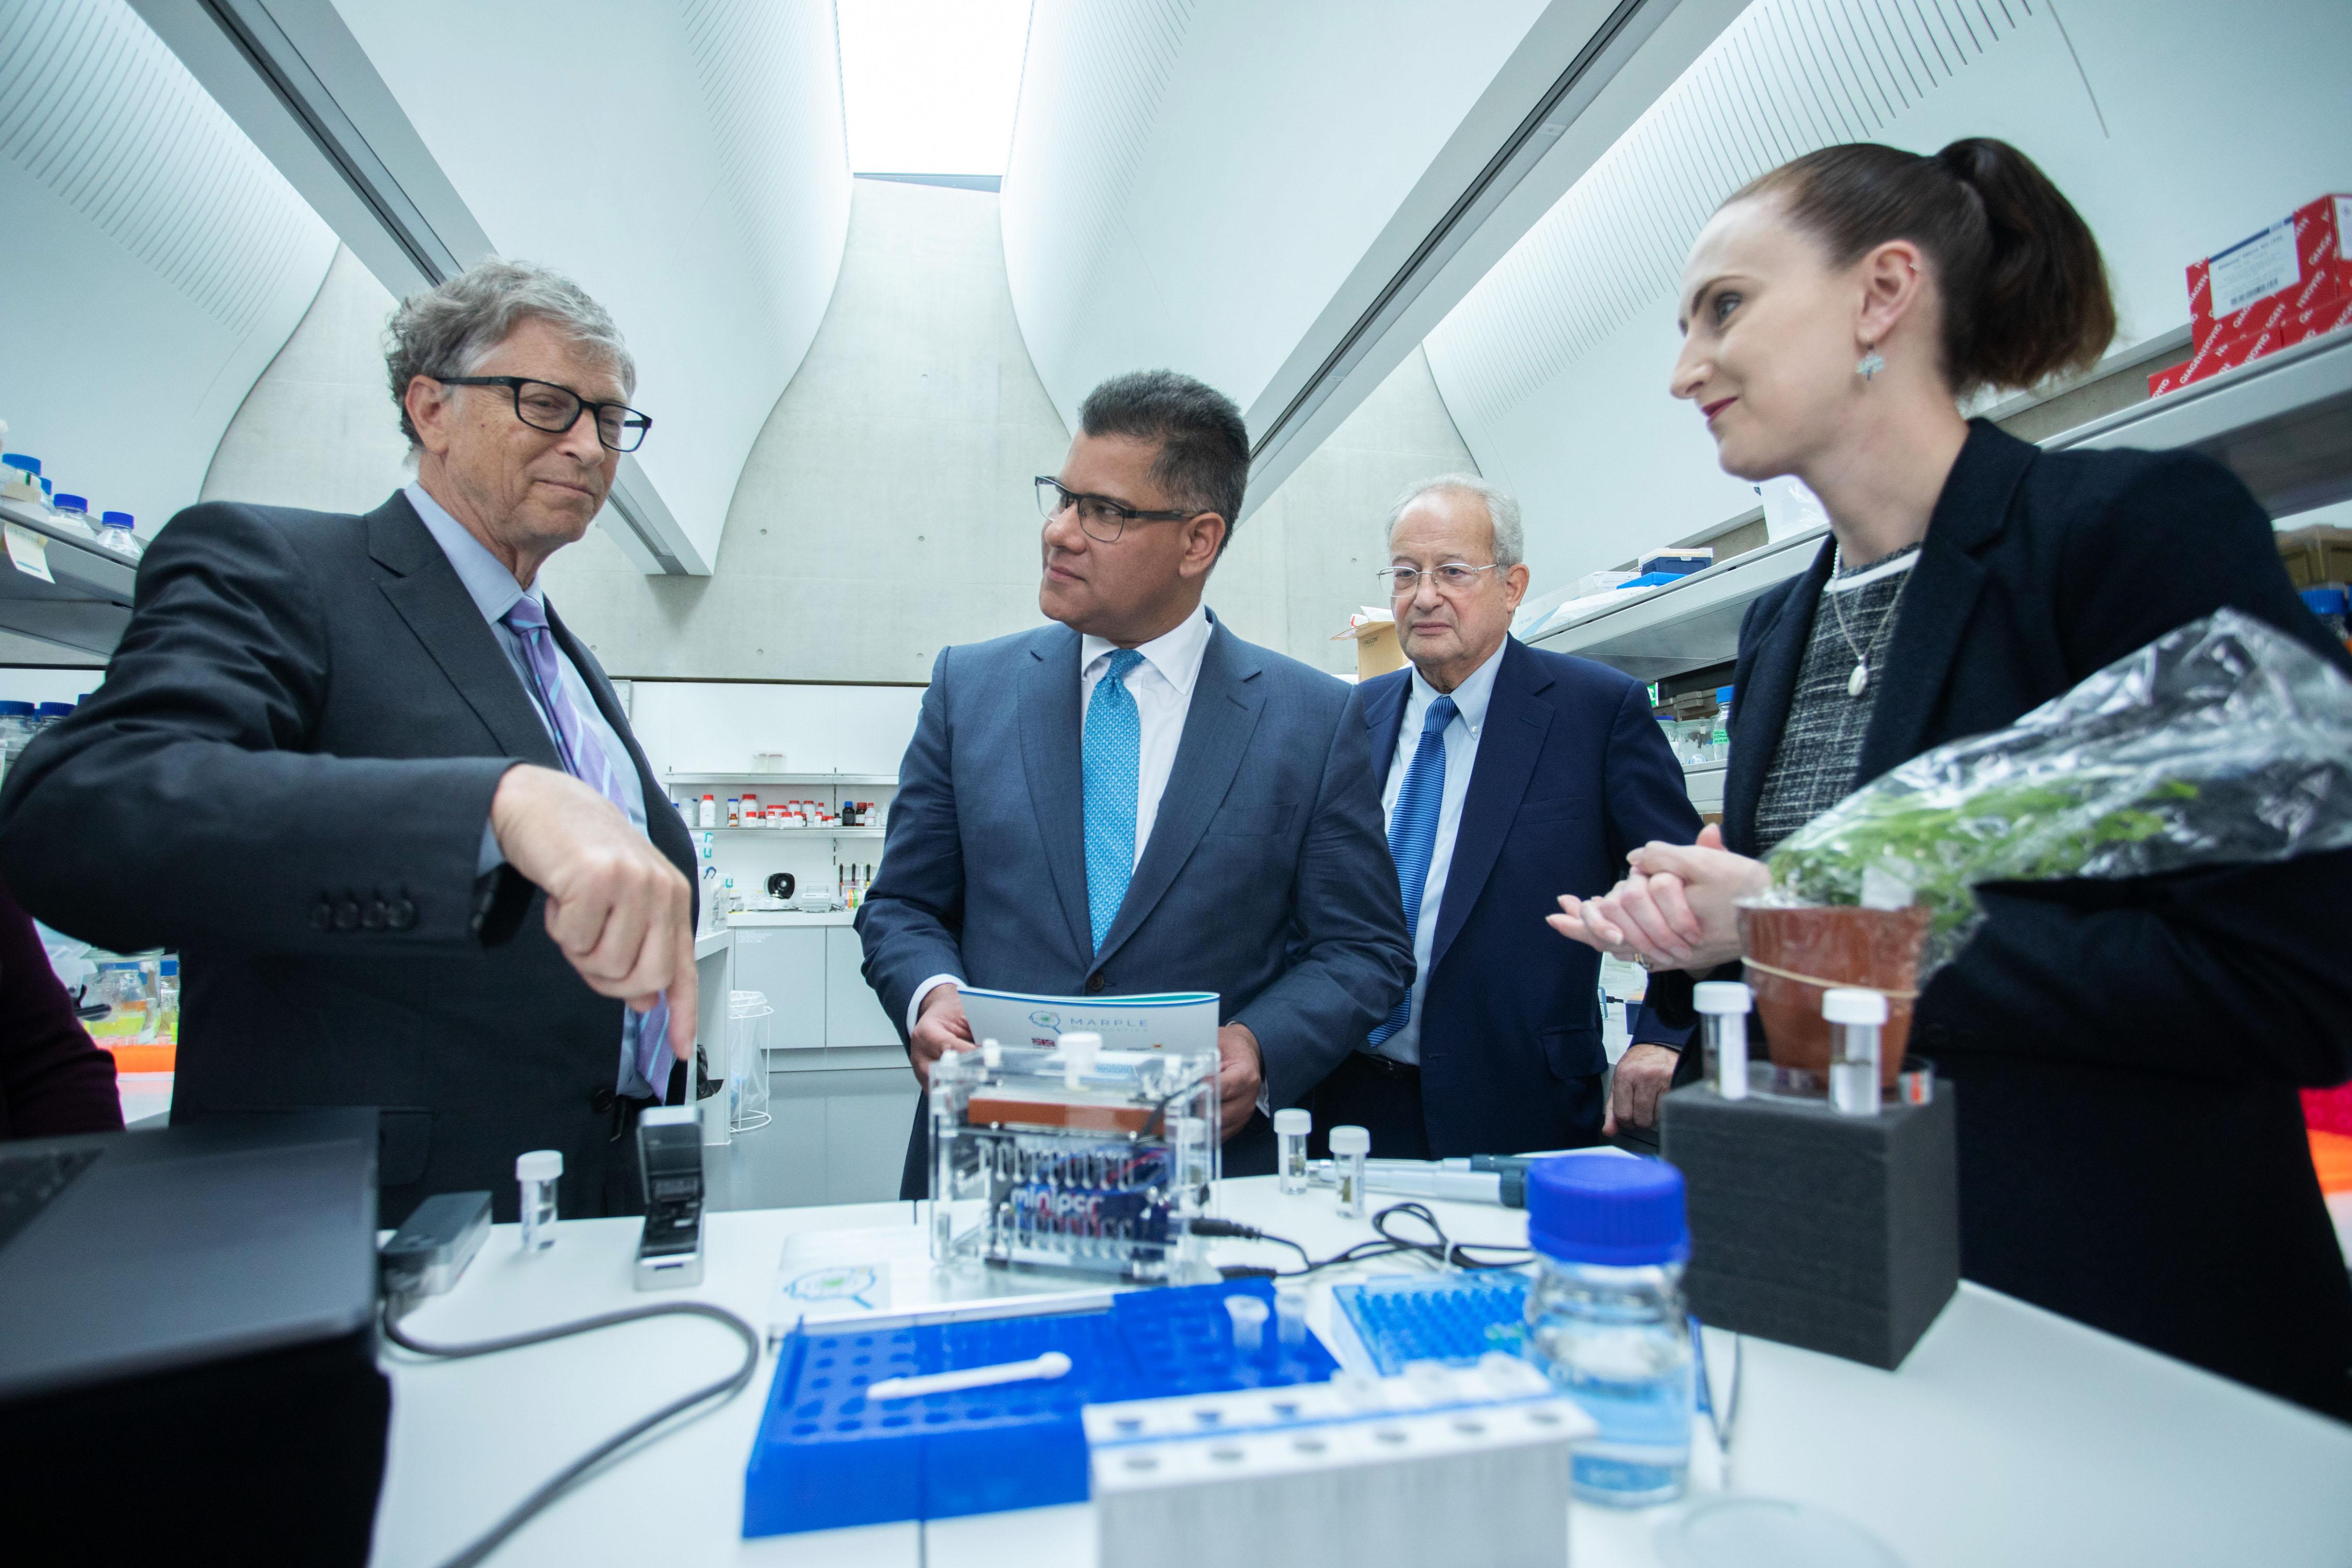 Diane Saunders (TSL) discusses her wheat rust diagnosis kit with Bill Gates, Alok  Sharma and Lord Sainsbury.